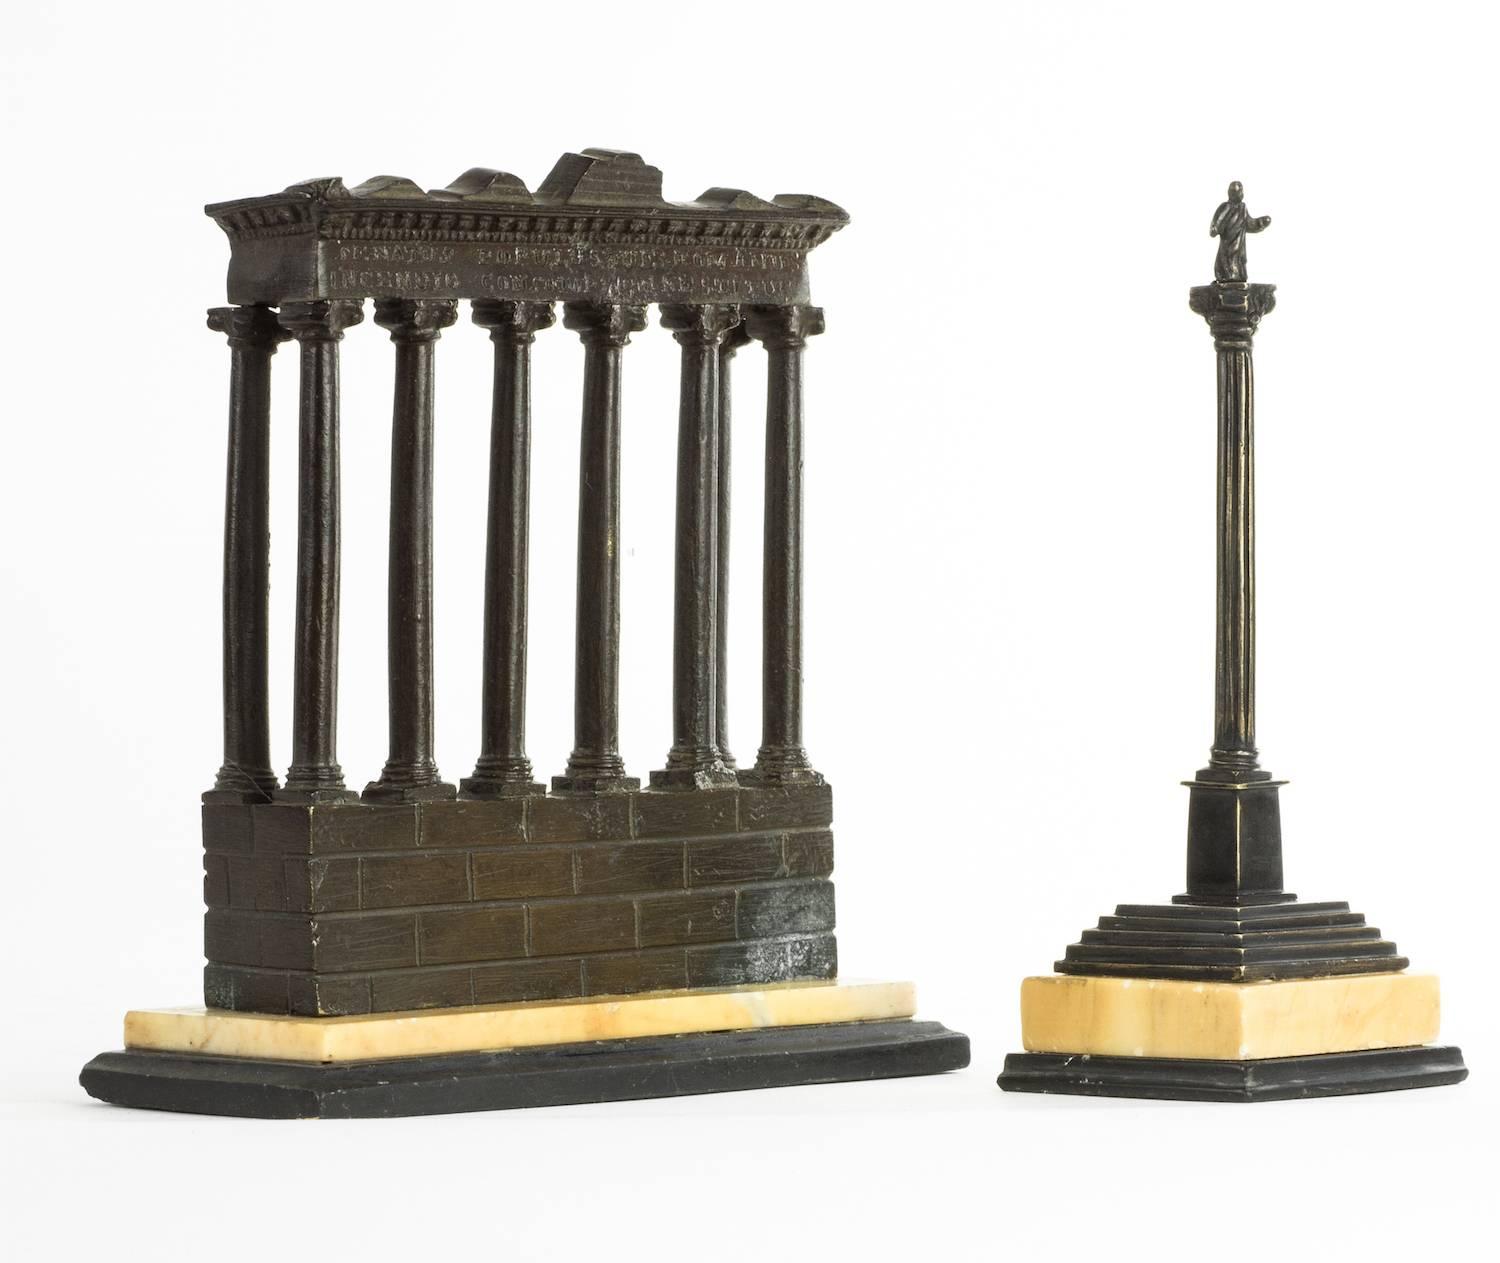 Italian Set of four Grand Tour architectural models of Roman ruins, c. 1880